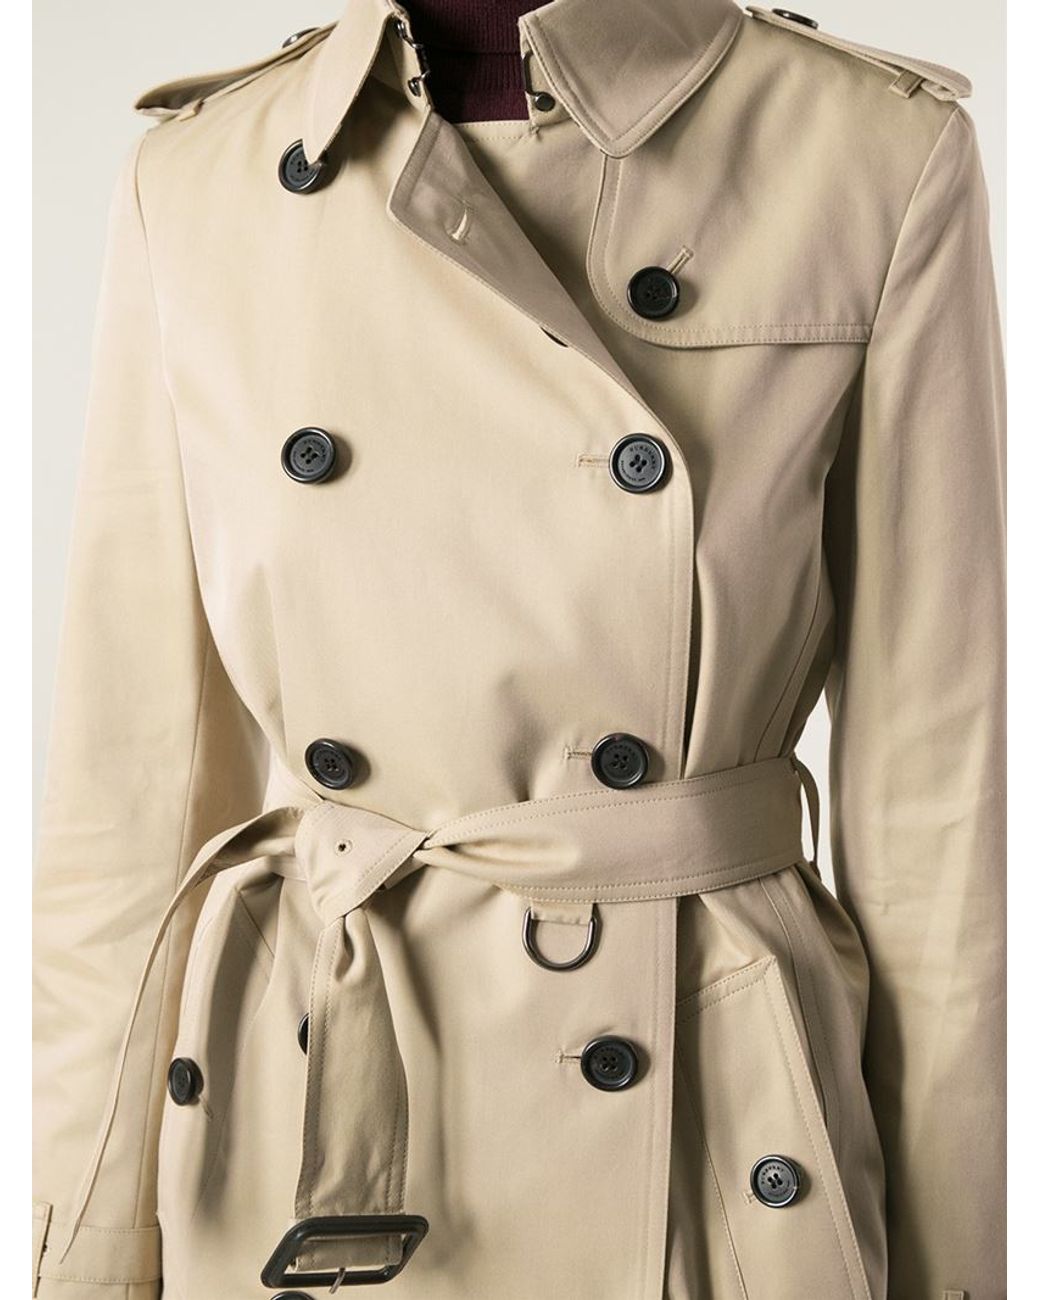 Burberry 'buckingham' Trench Coat in Natural | Lyst